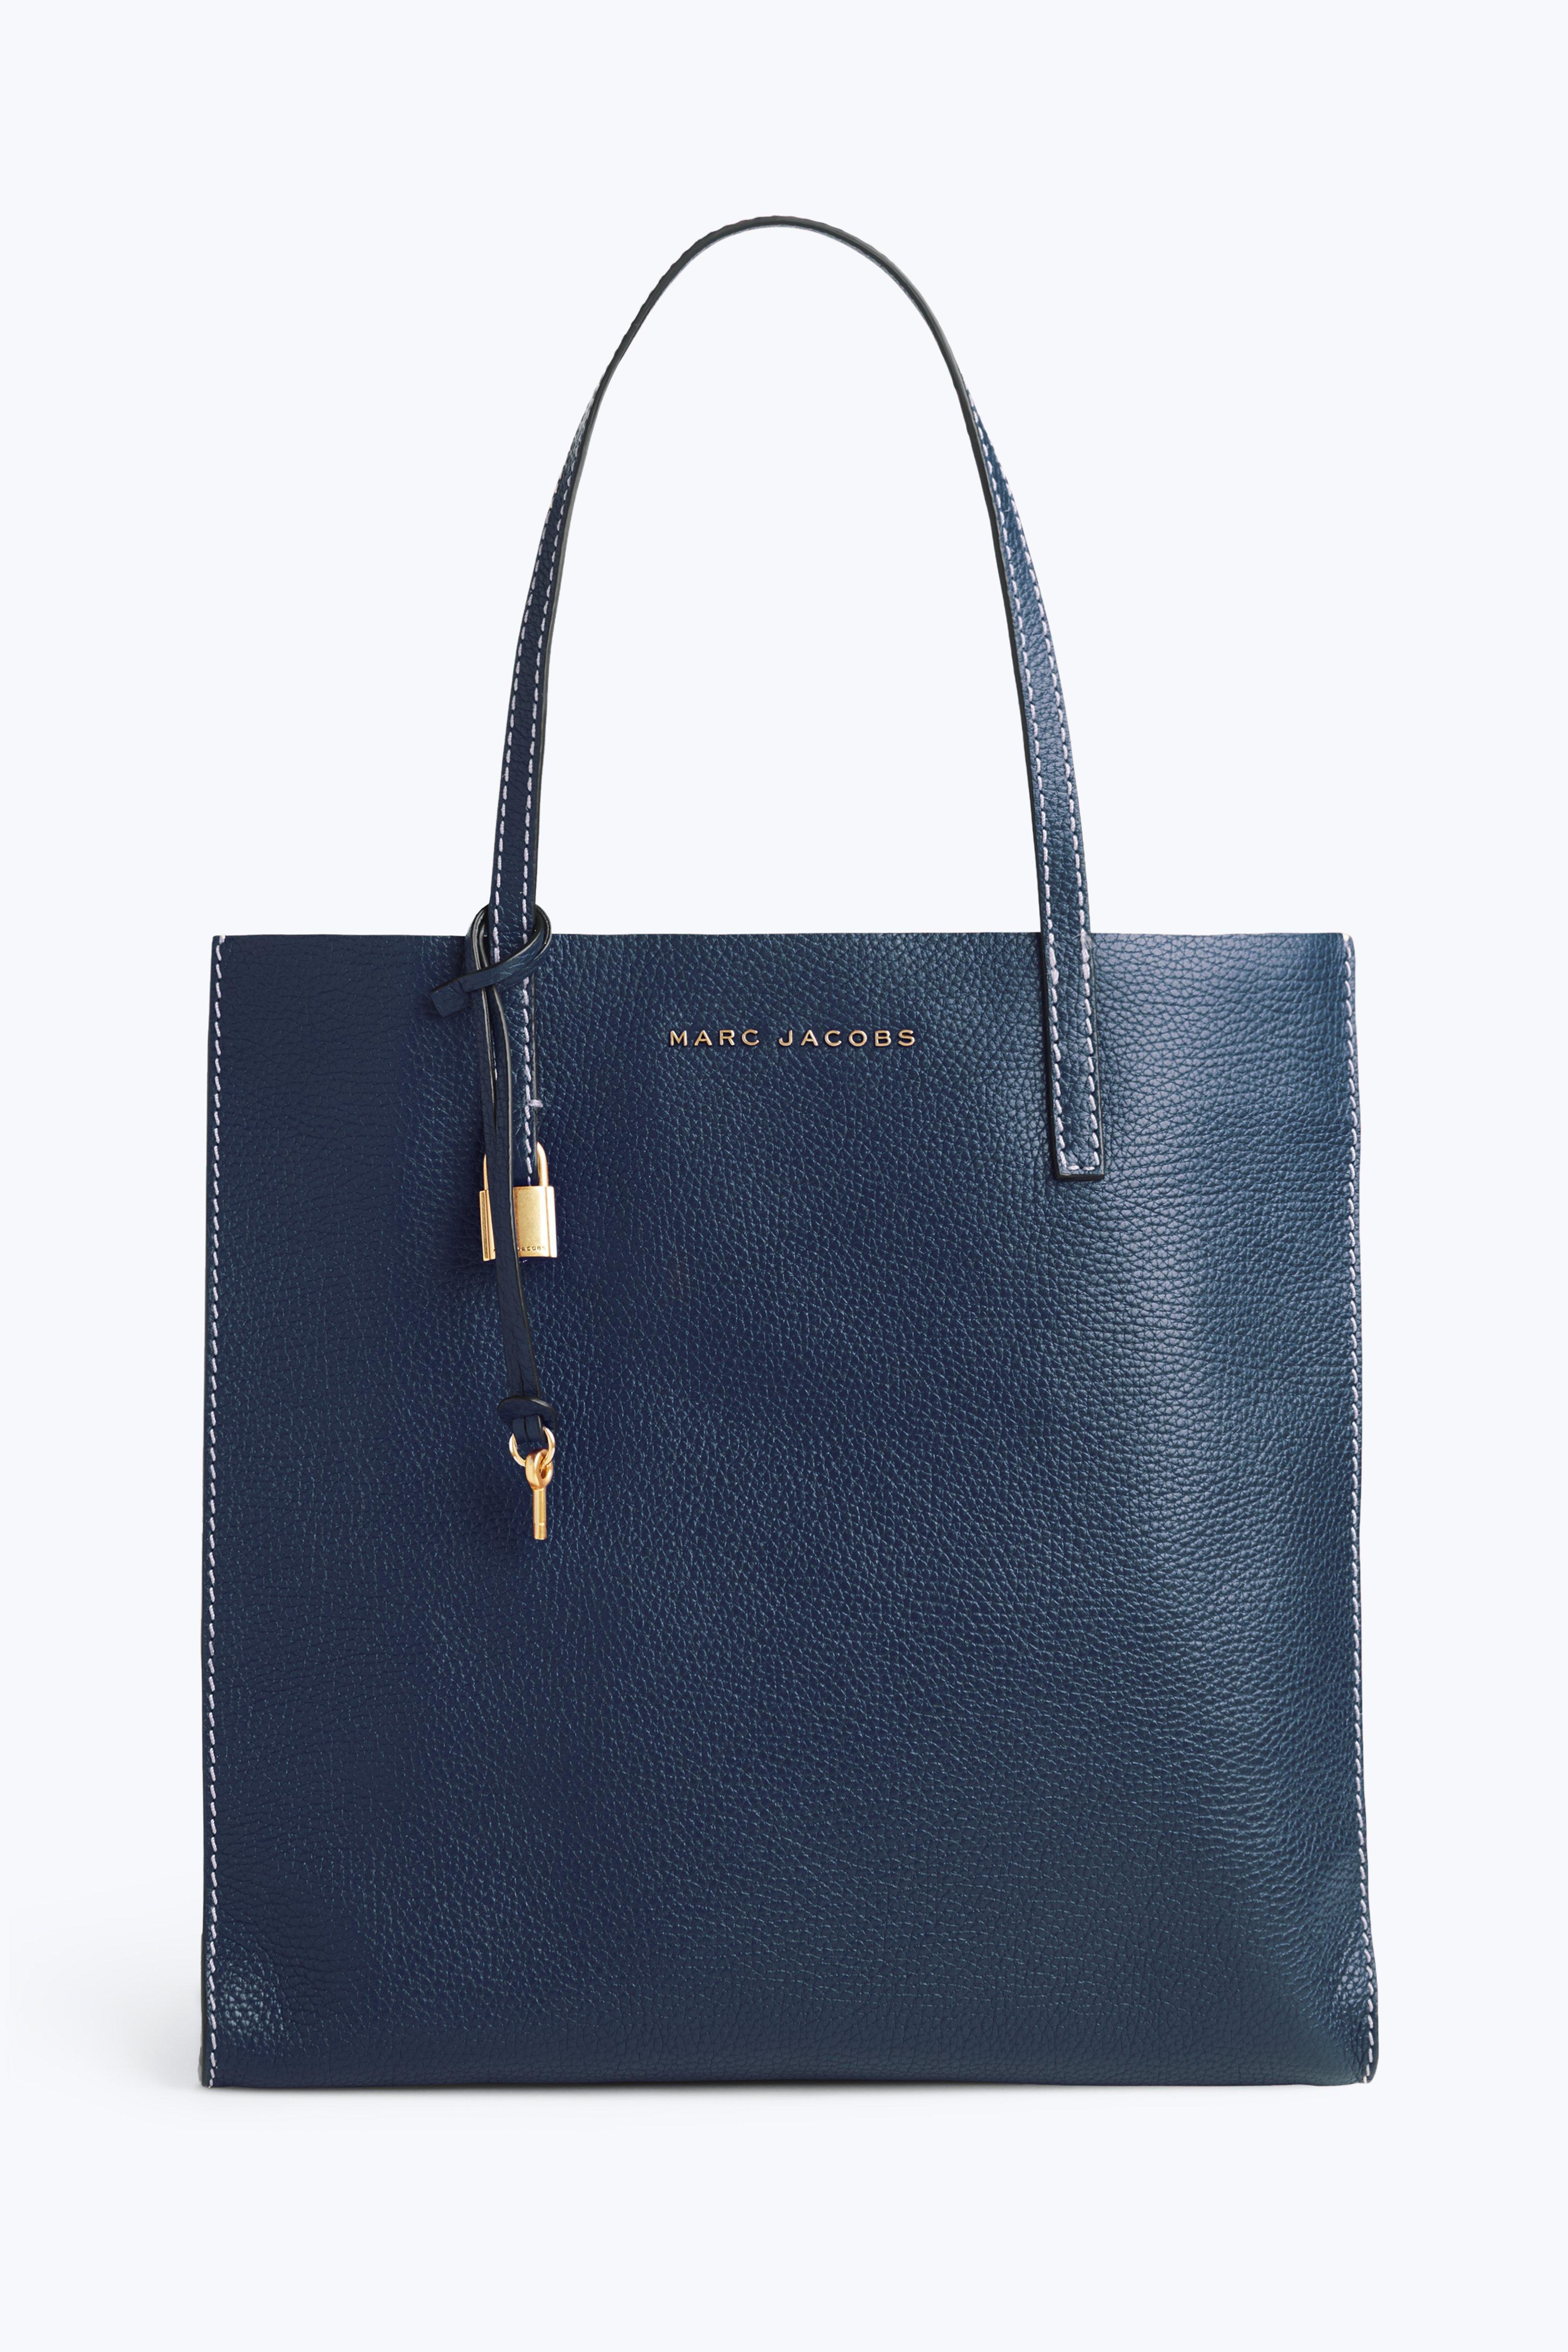 Lyst - Marc Jacobs The Grind Shopper Tote Bag in Blue